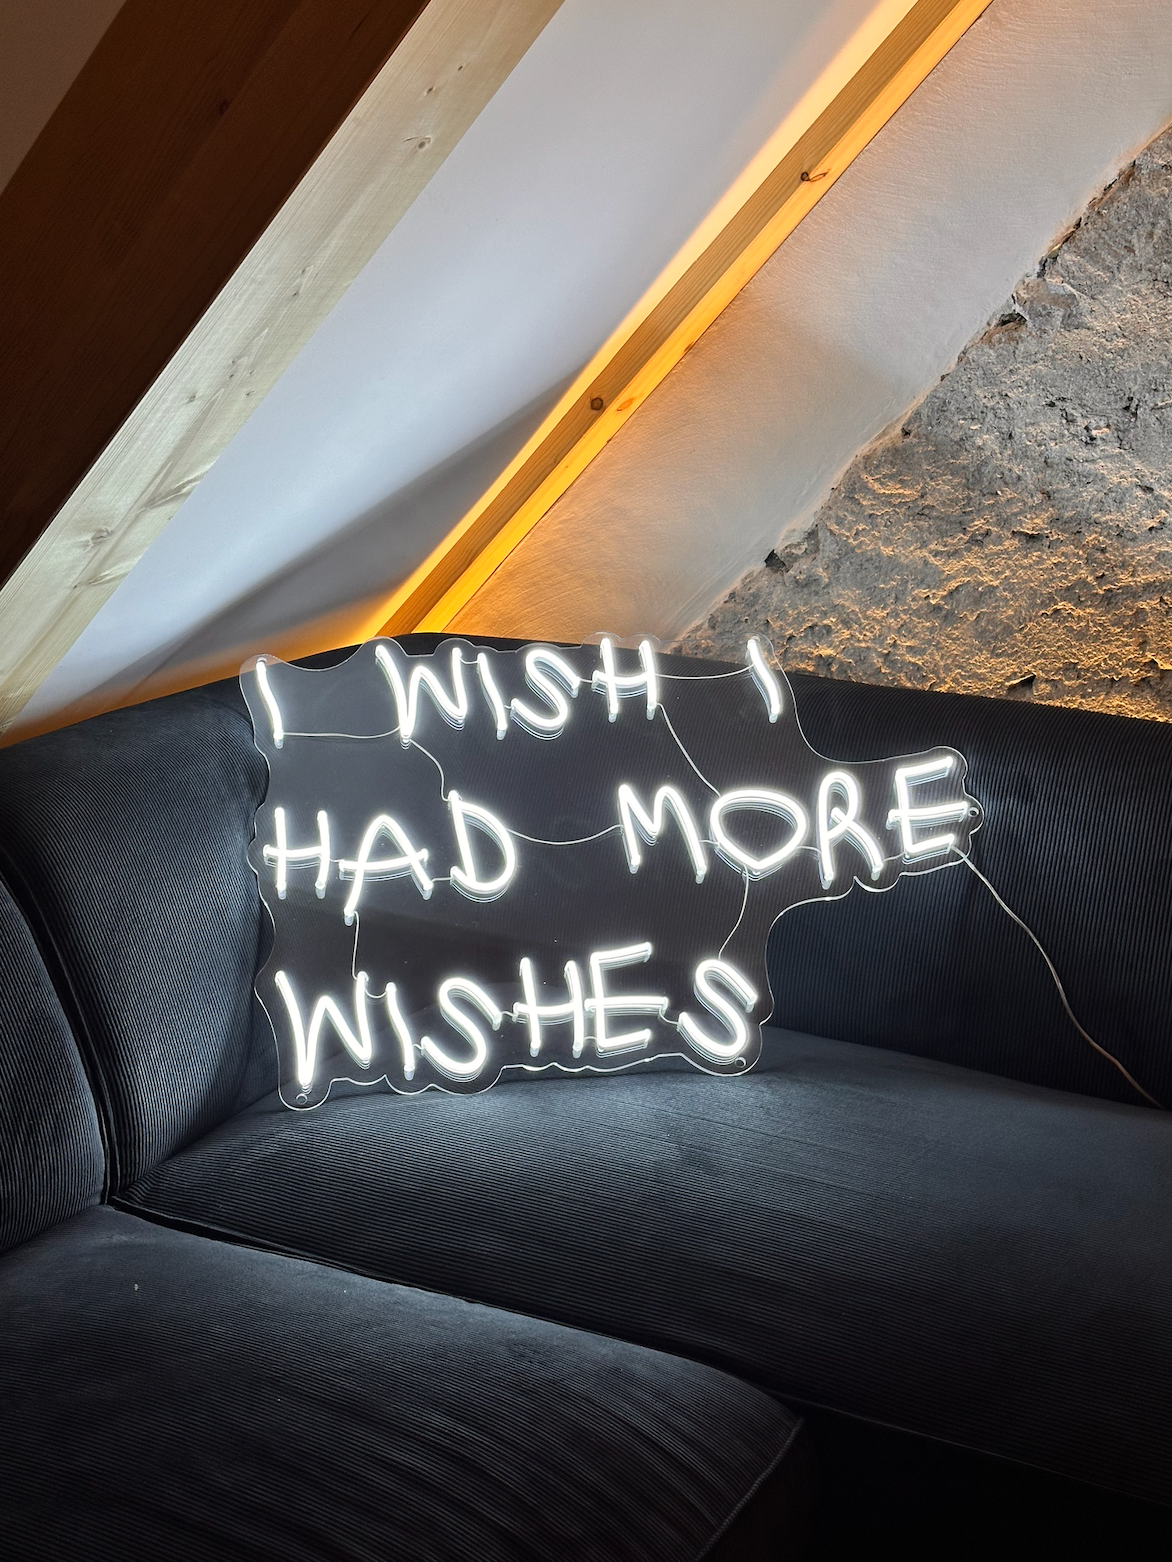 Wish more wishes